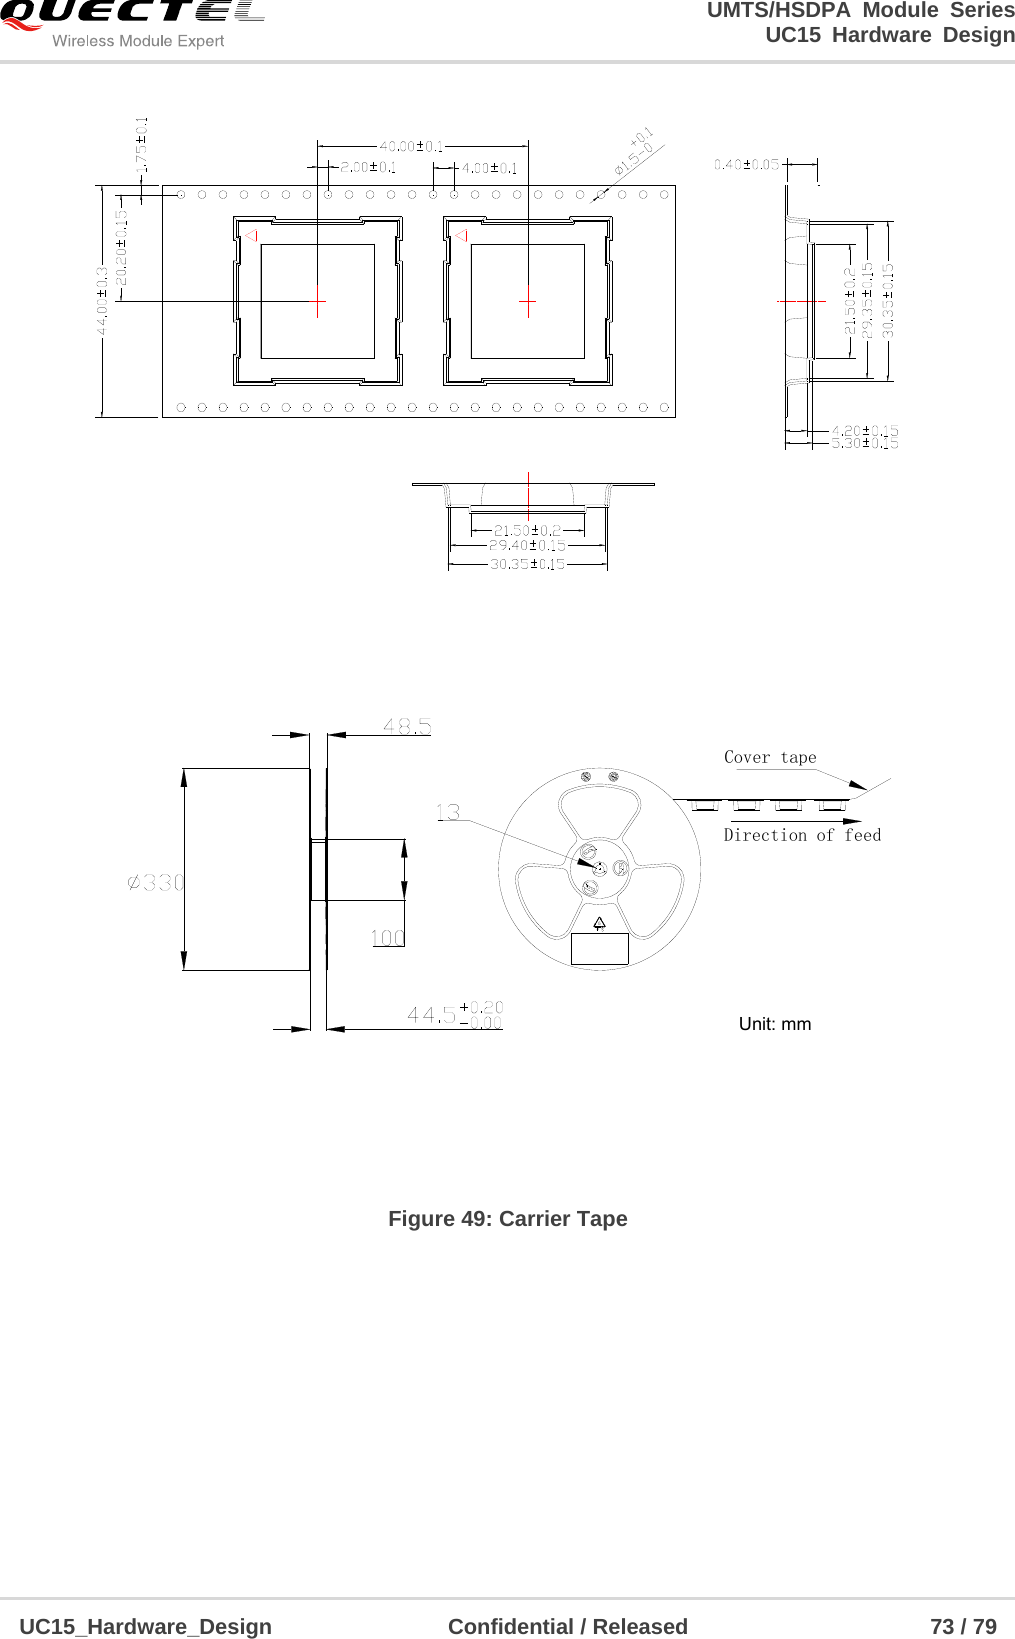                                                                        UMTS/HSDPA Module Series                                                                 UC15 Hardware Design  UC15_Hardware_Design                Confidential / Released                      73 / 79     Direction of feedCover tape  Figure 49: Carrier Tape  